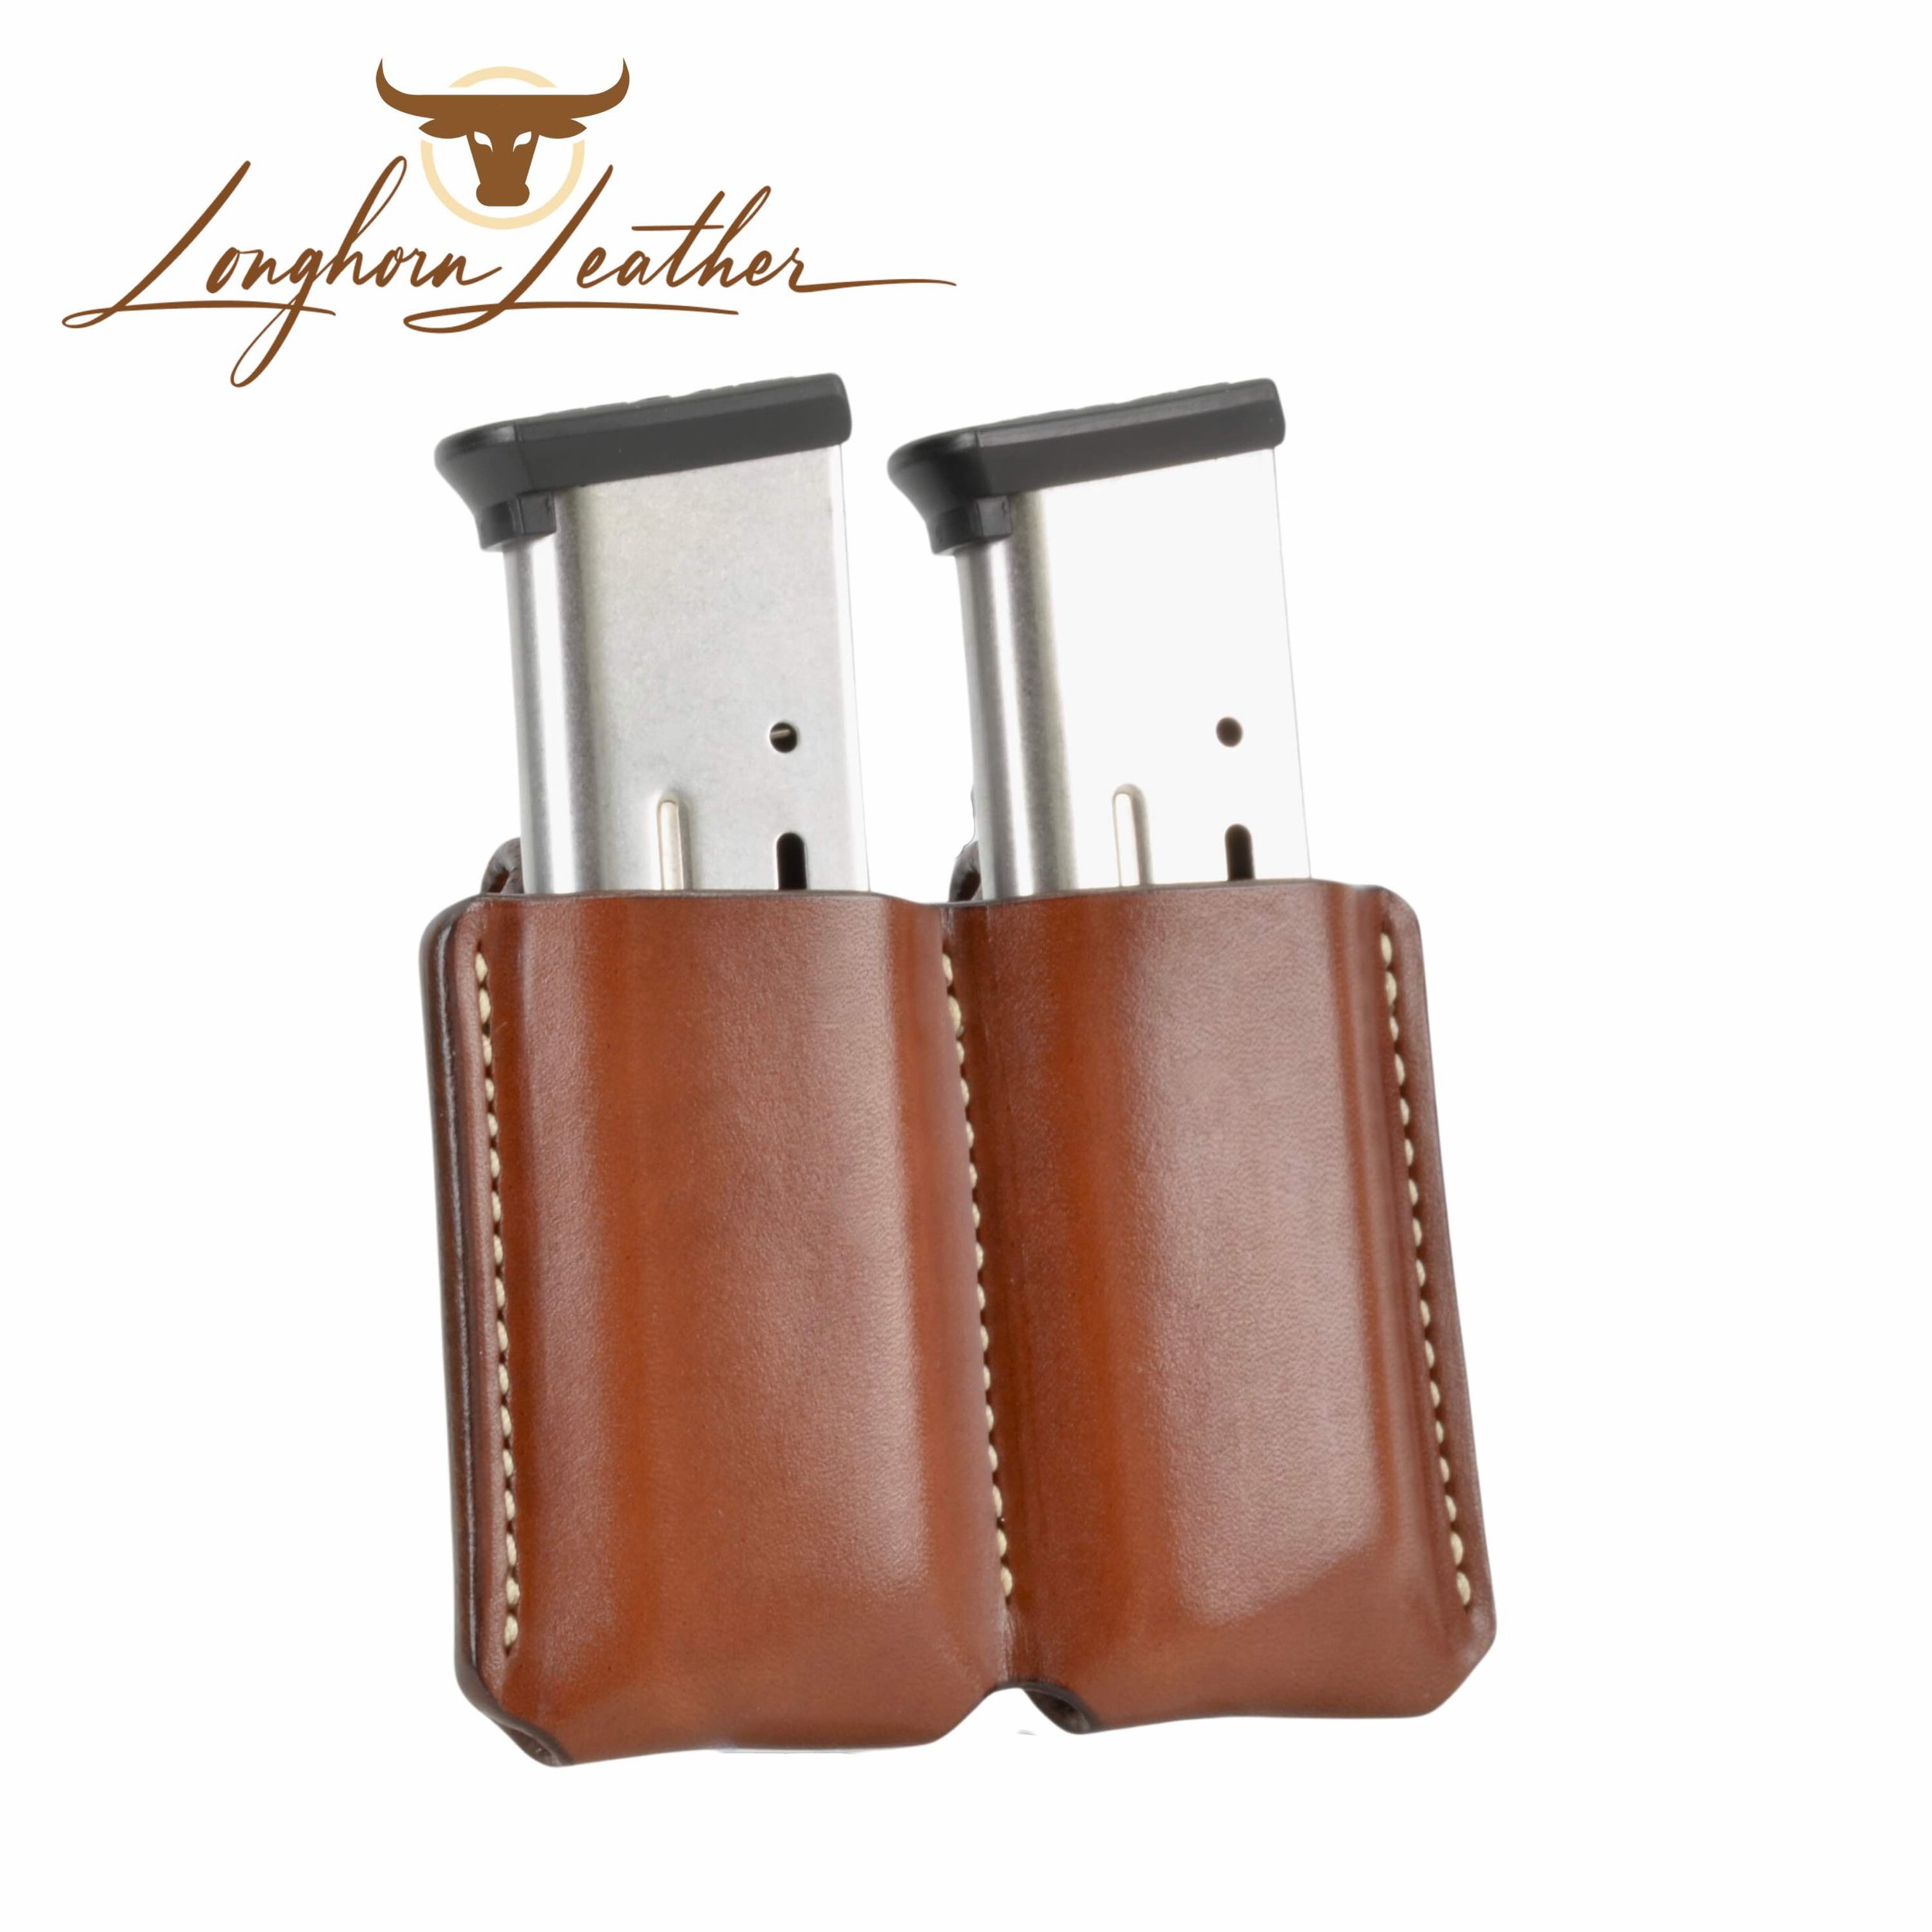 Custom leather 1911 double magazine carrier.  Individually handcrafted at Longhorn Leather AZ